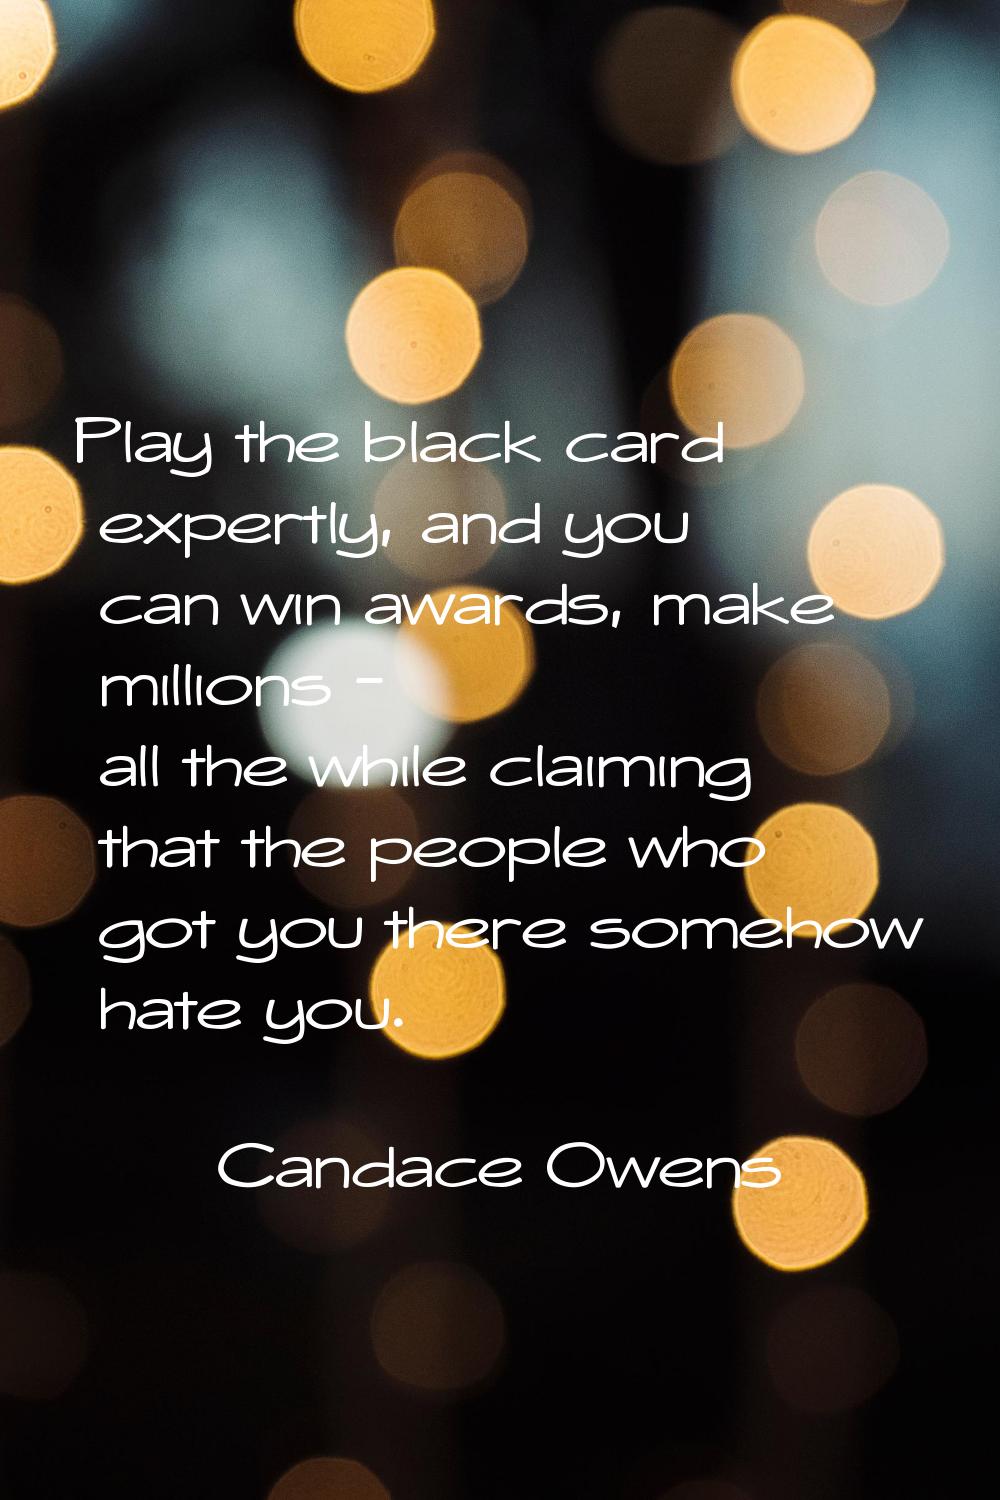 Play the black card expertly, and you can win awards, make millions - all the while claiming that t